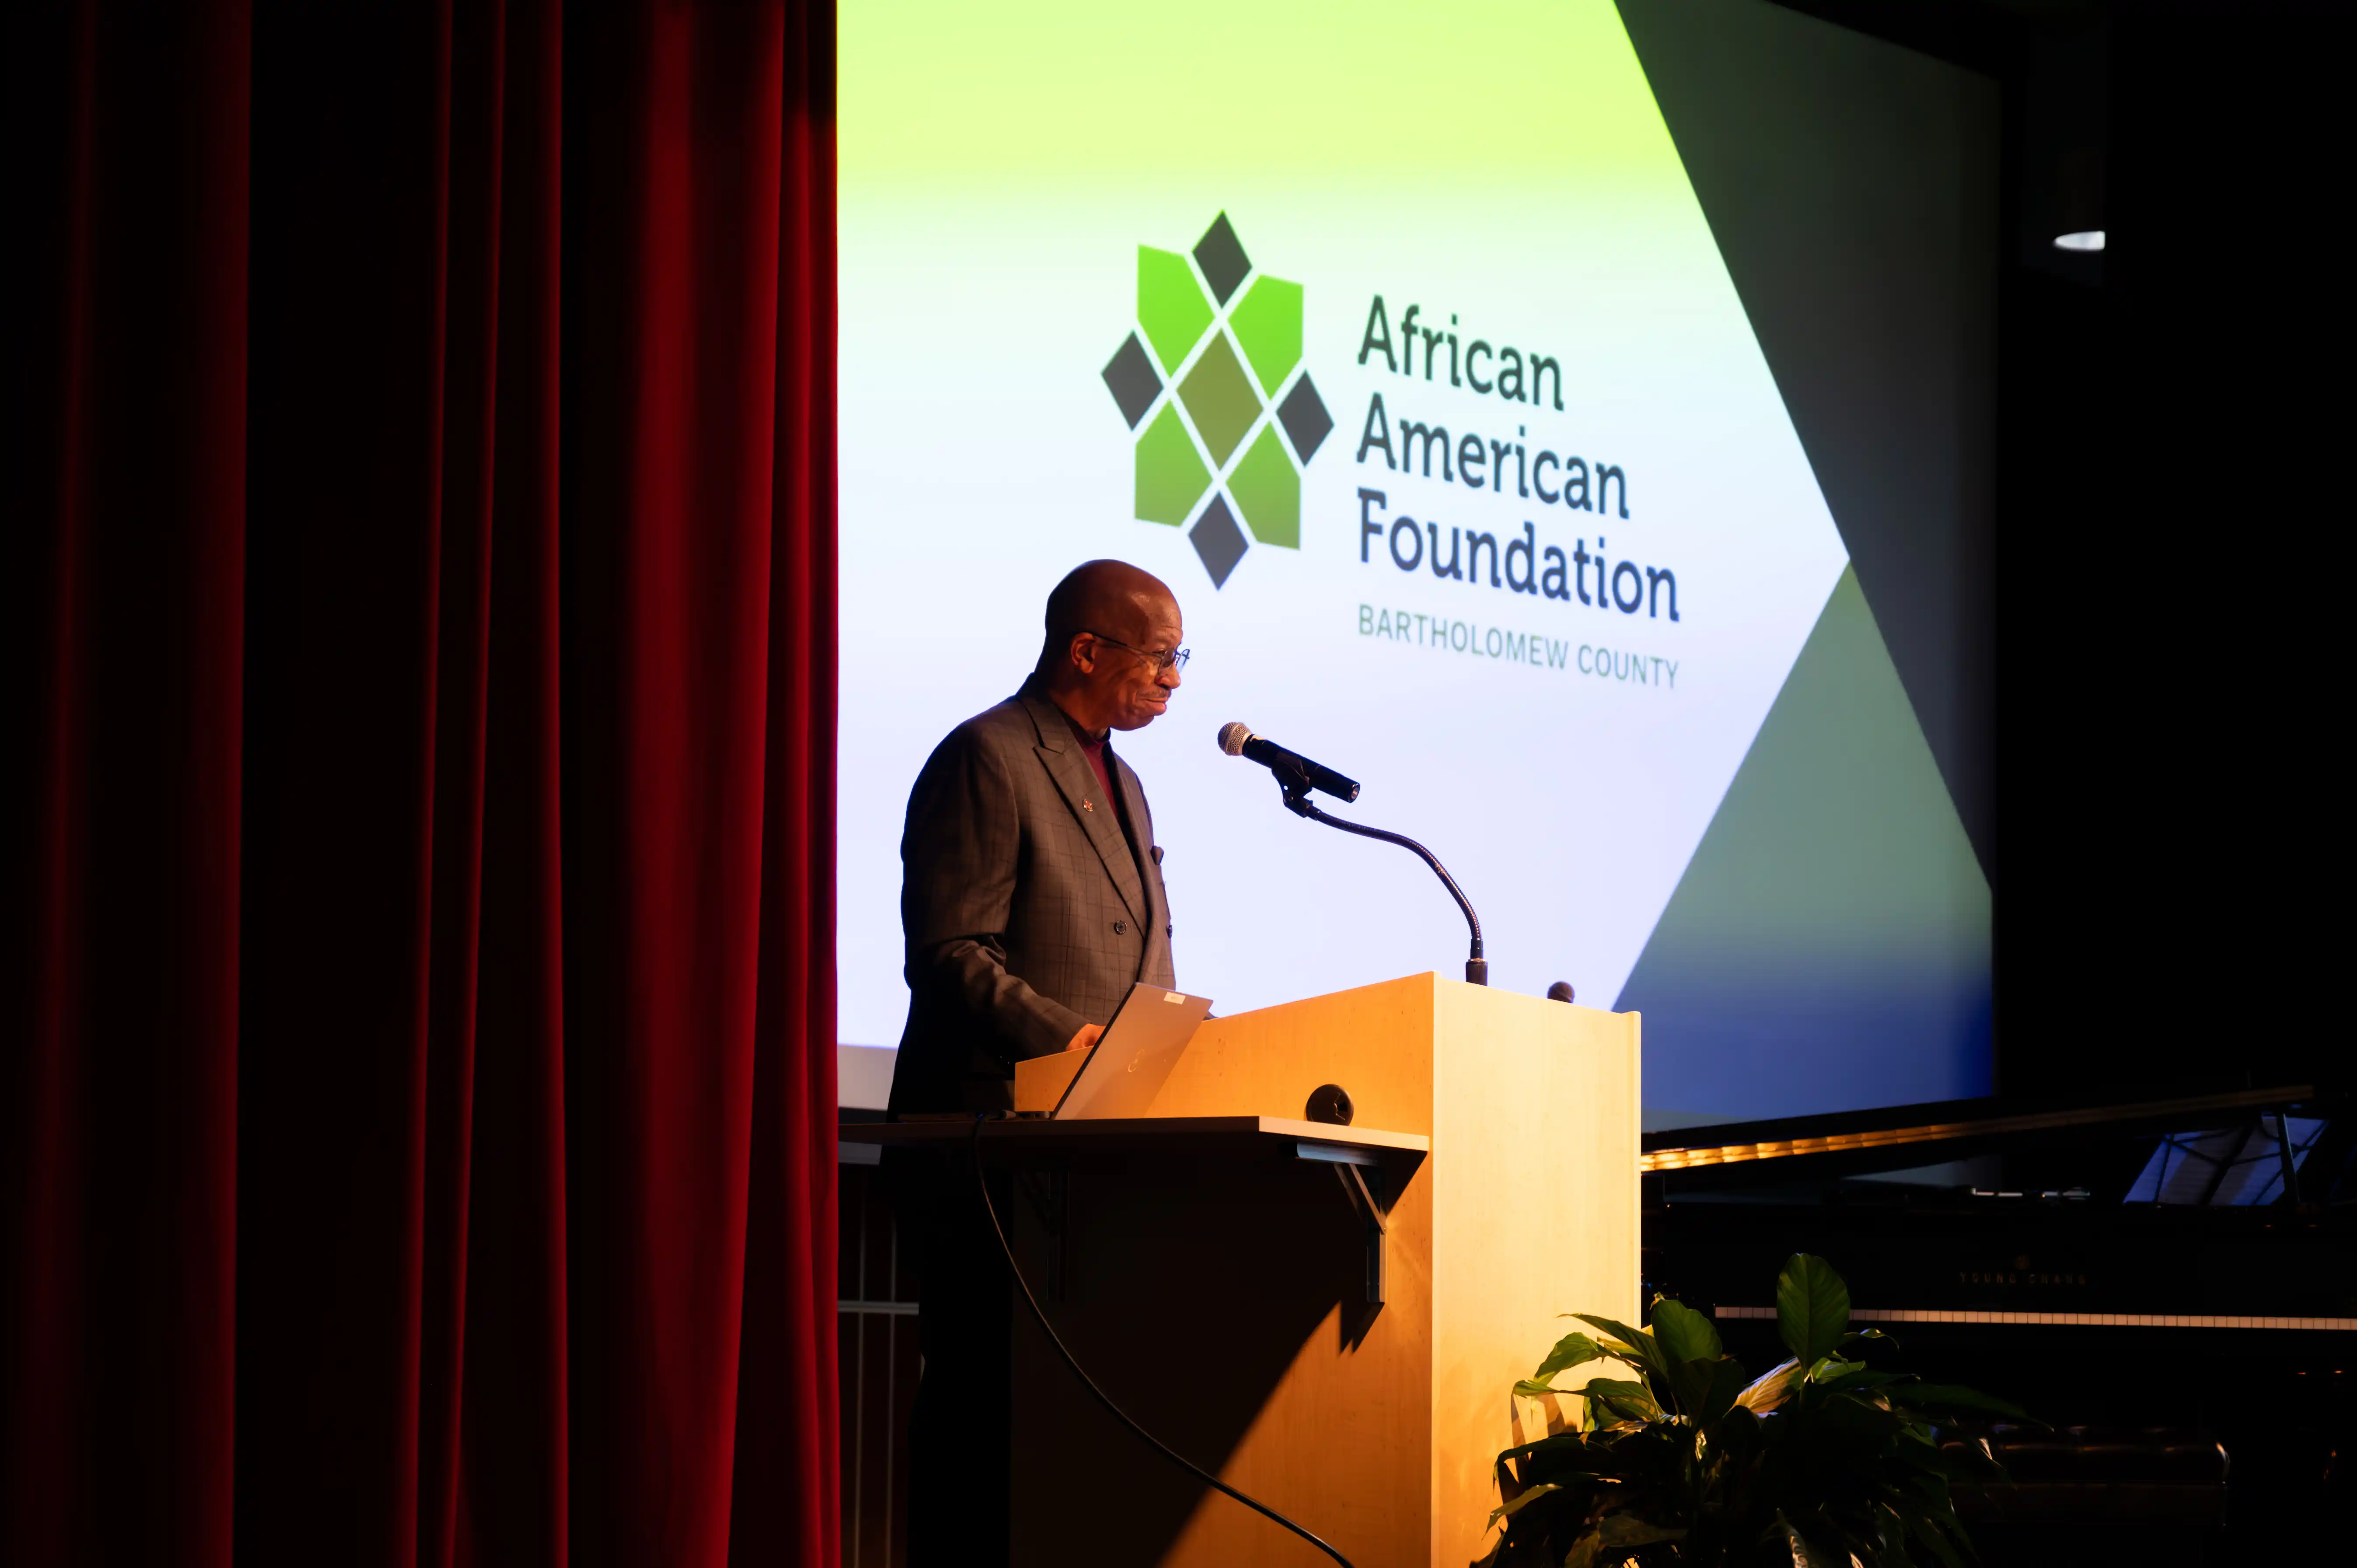 Person speaking at a podium with the African American Foundation logo projected on a screen in the background.